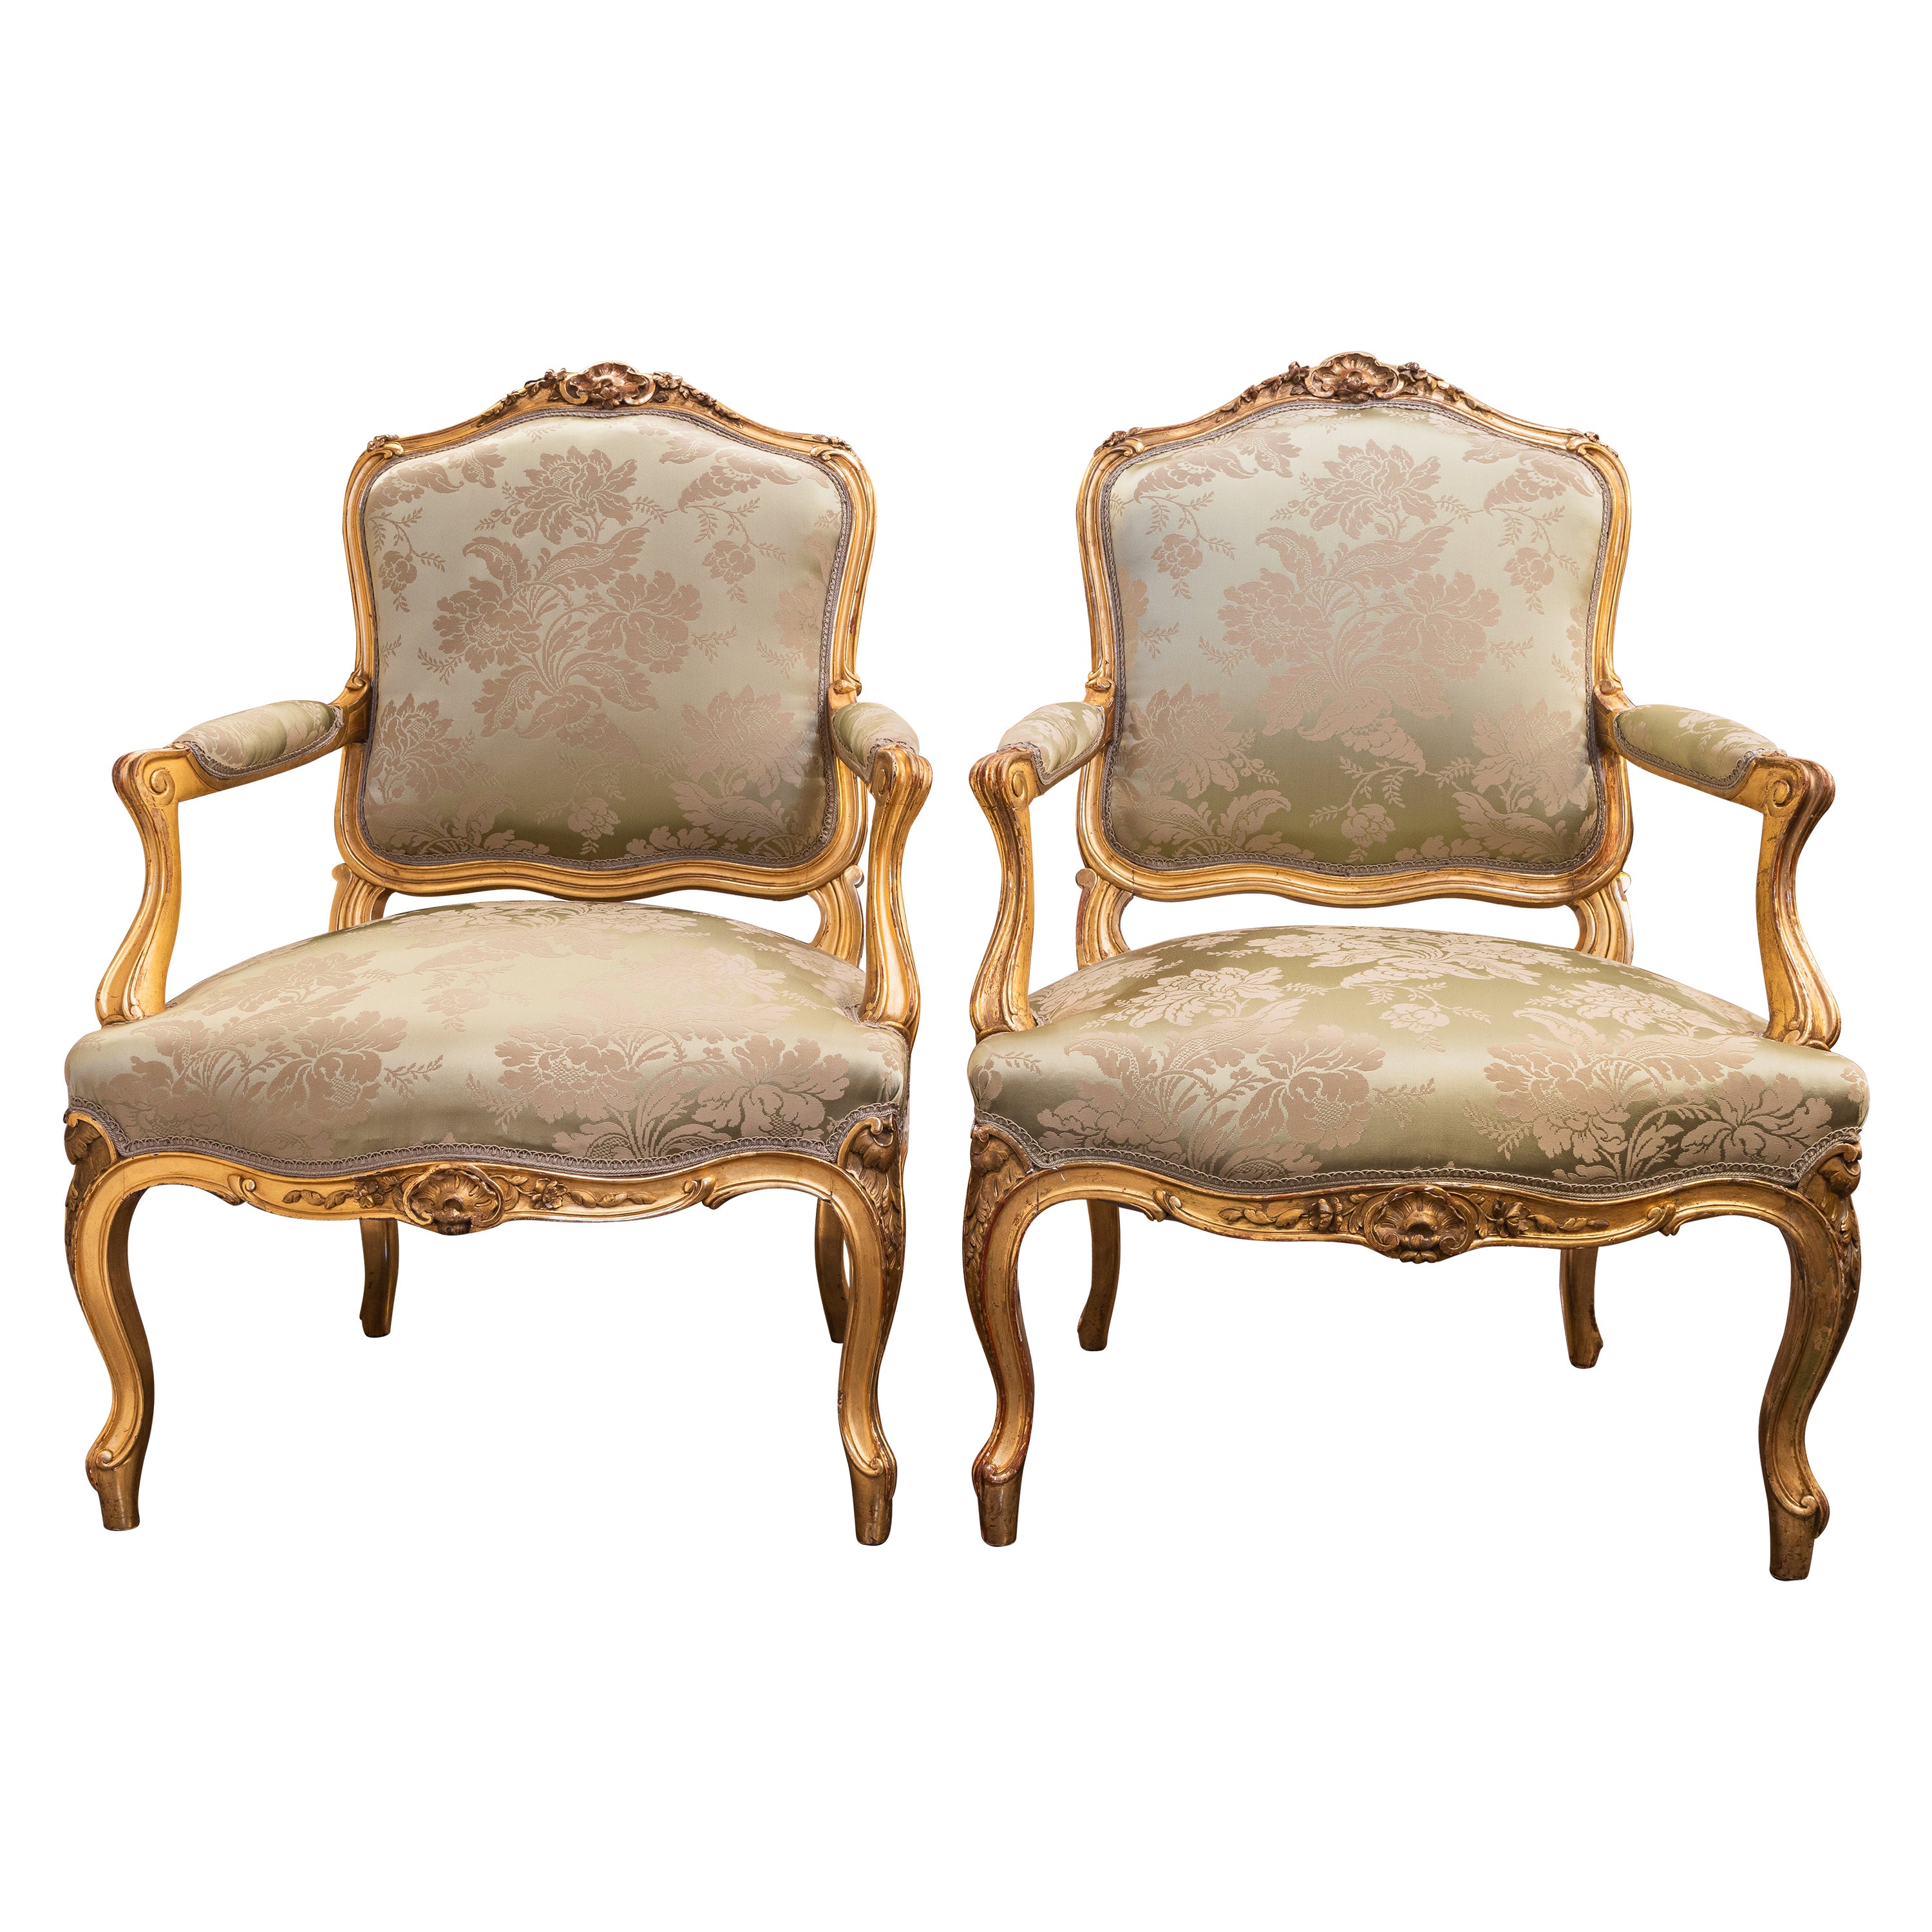 A fine pair of 19th c Louis XV water gilt fauteuils . Fine carving with a silk  For Sale